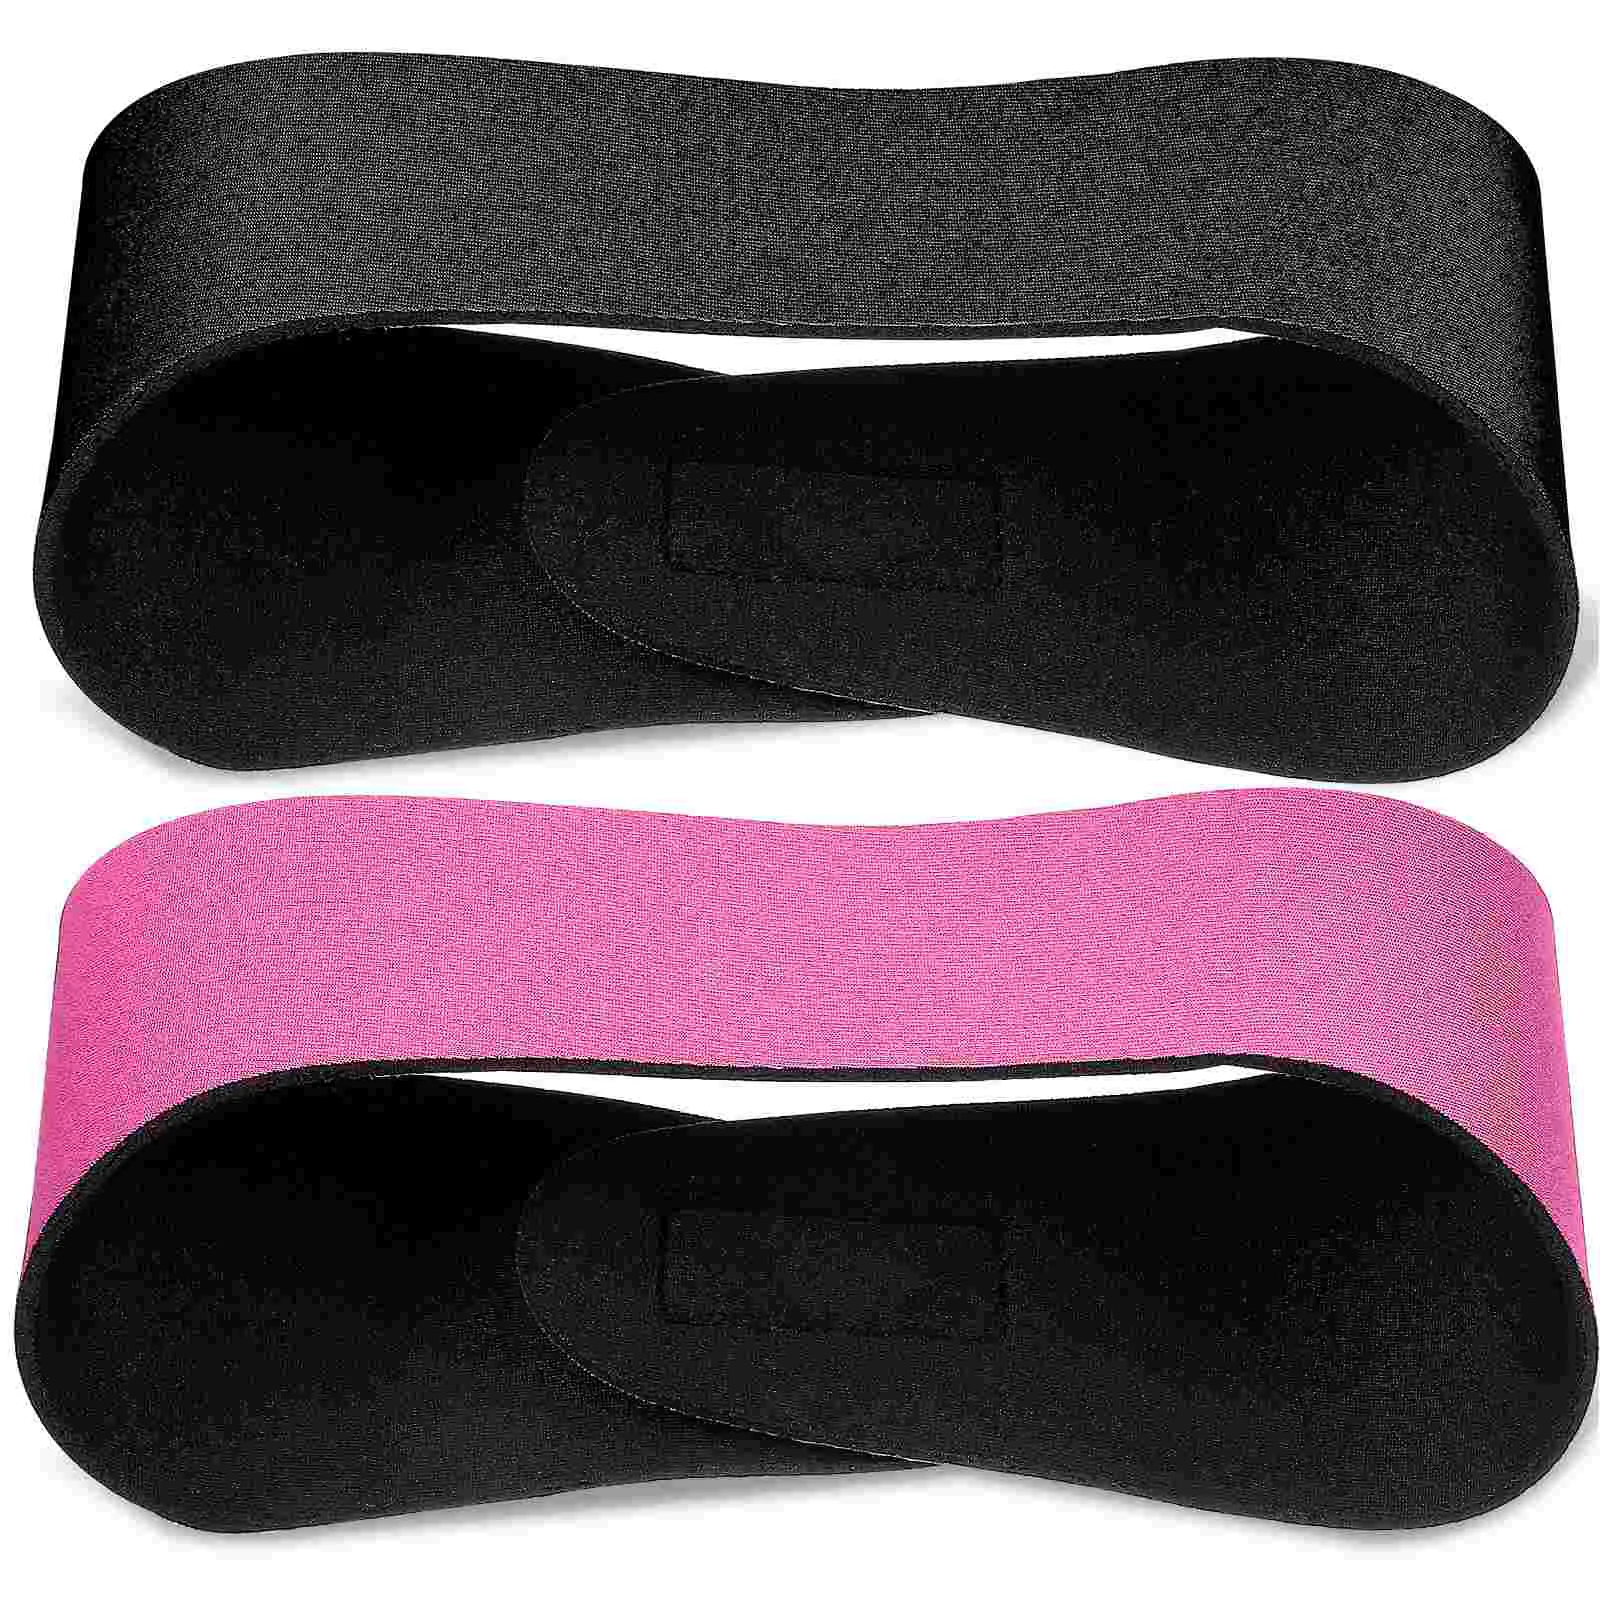 

2 Pcs Headband Ear Protection Earbuds Swimming Headbands Toddlers Sports Rubber Child